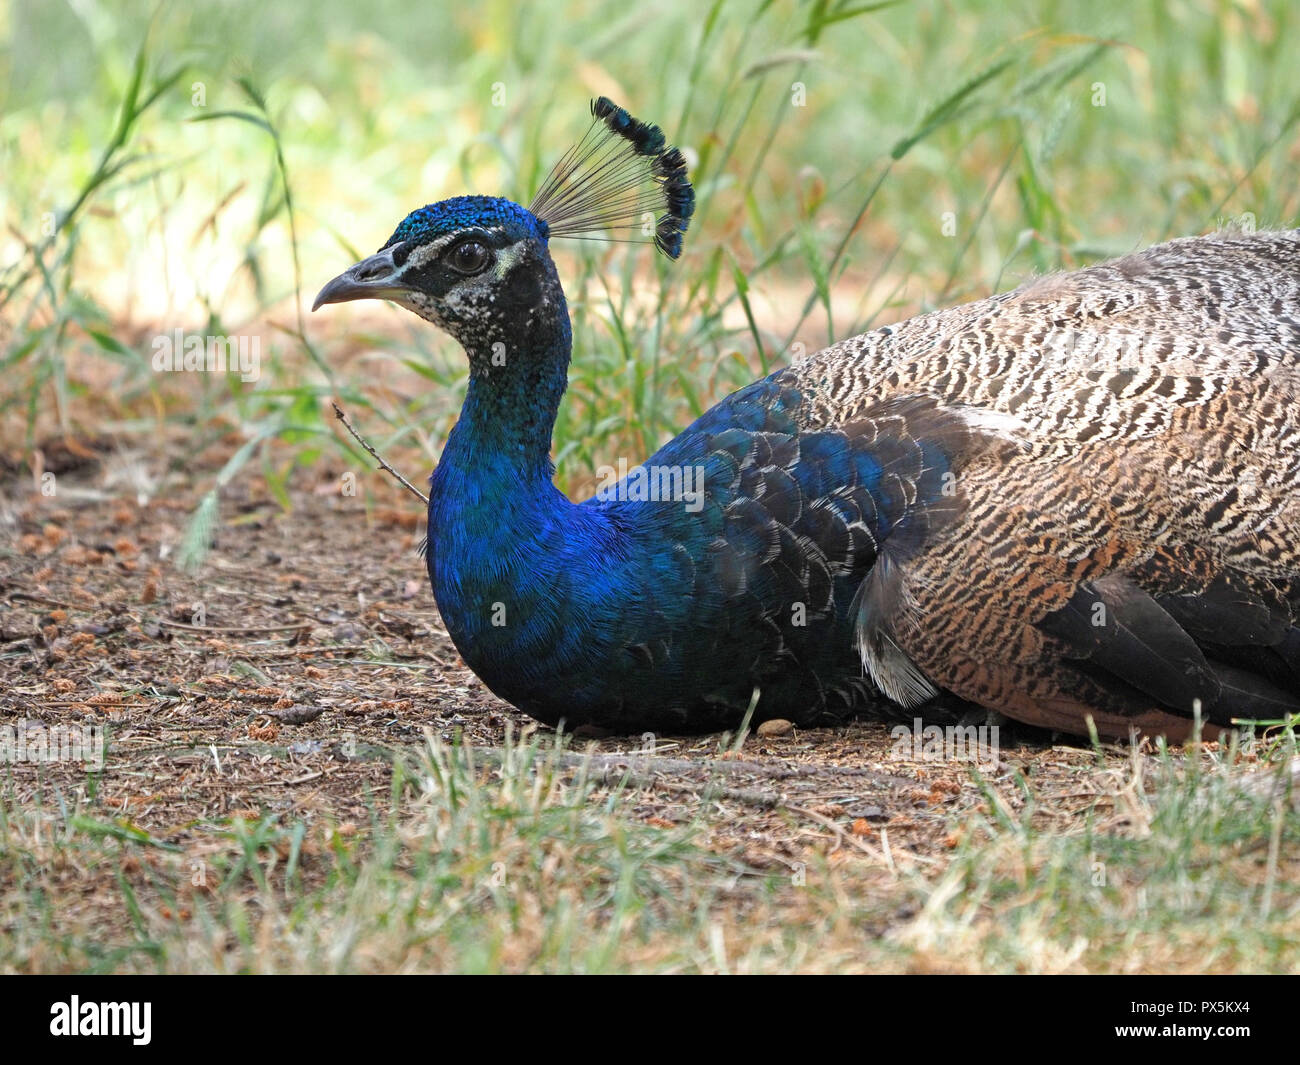 male Indian Peacock or indian Peafowl (Pavo cristatus) with iridescent plumage and crest sitting on sandy ground in garden in London, England, UK Stock Photo